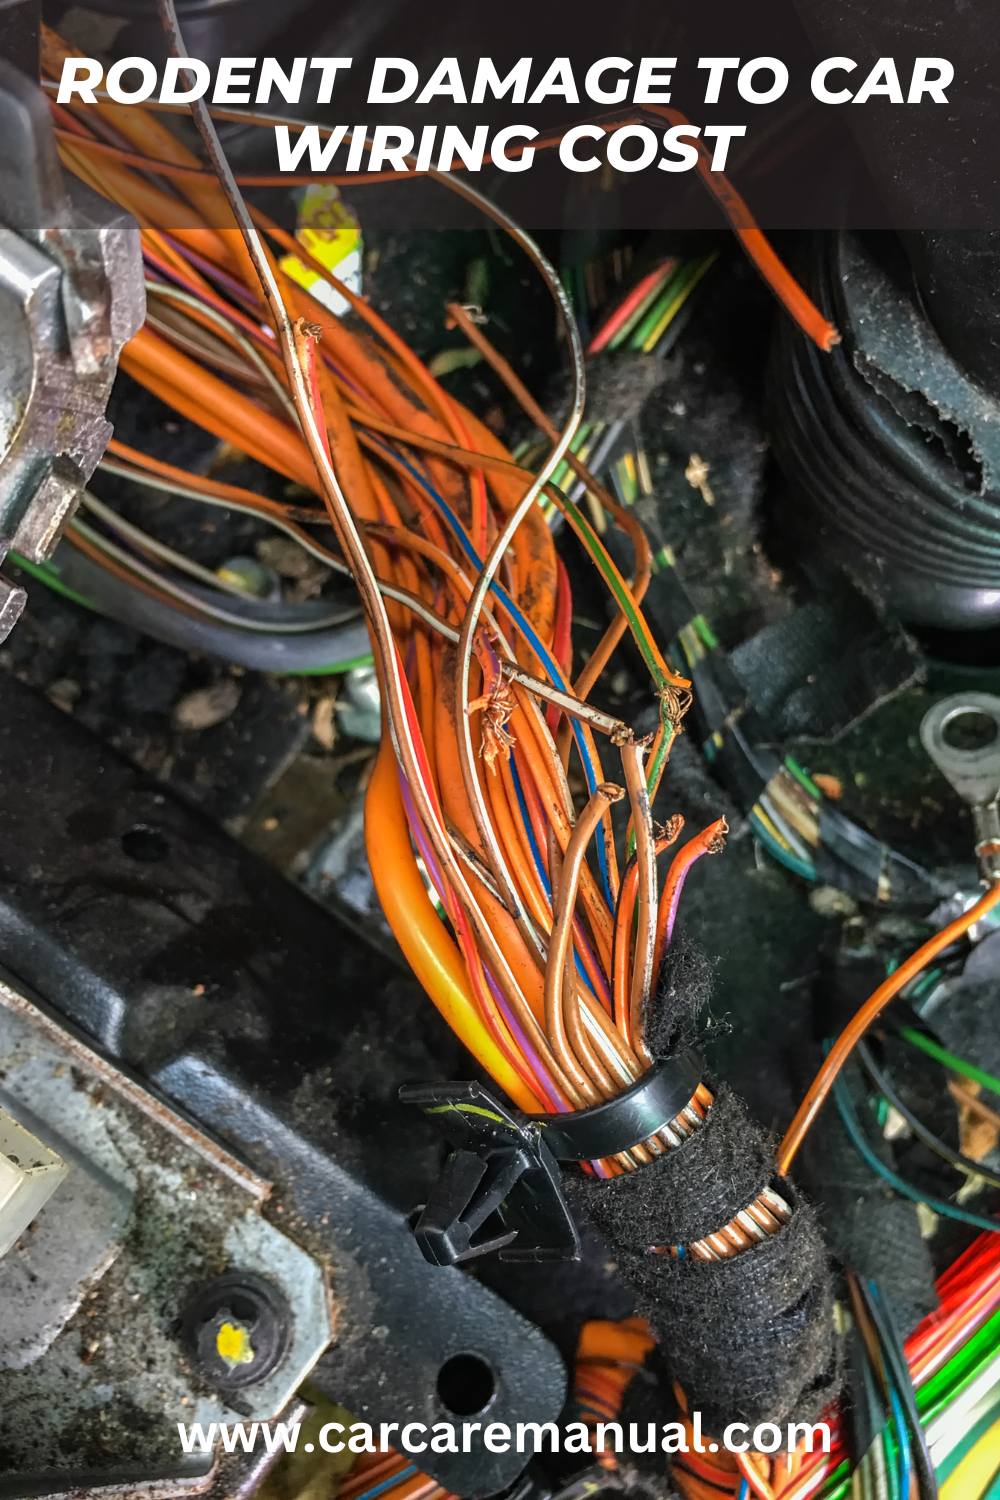 Rodent damage to car wiring cost